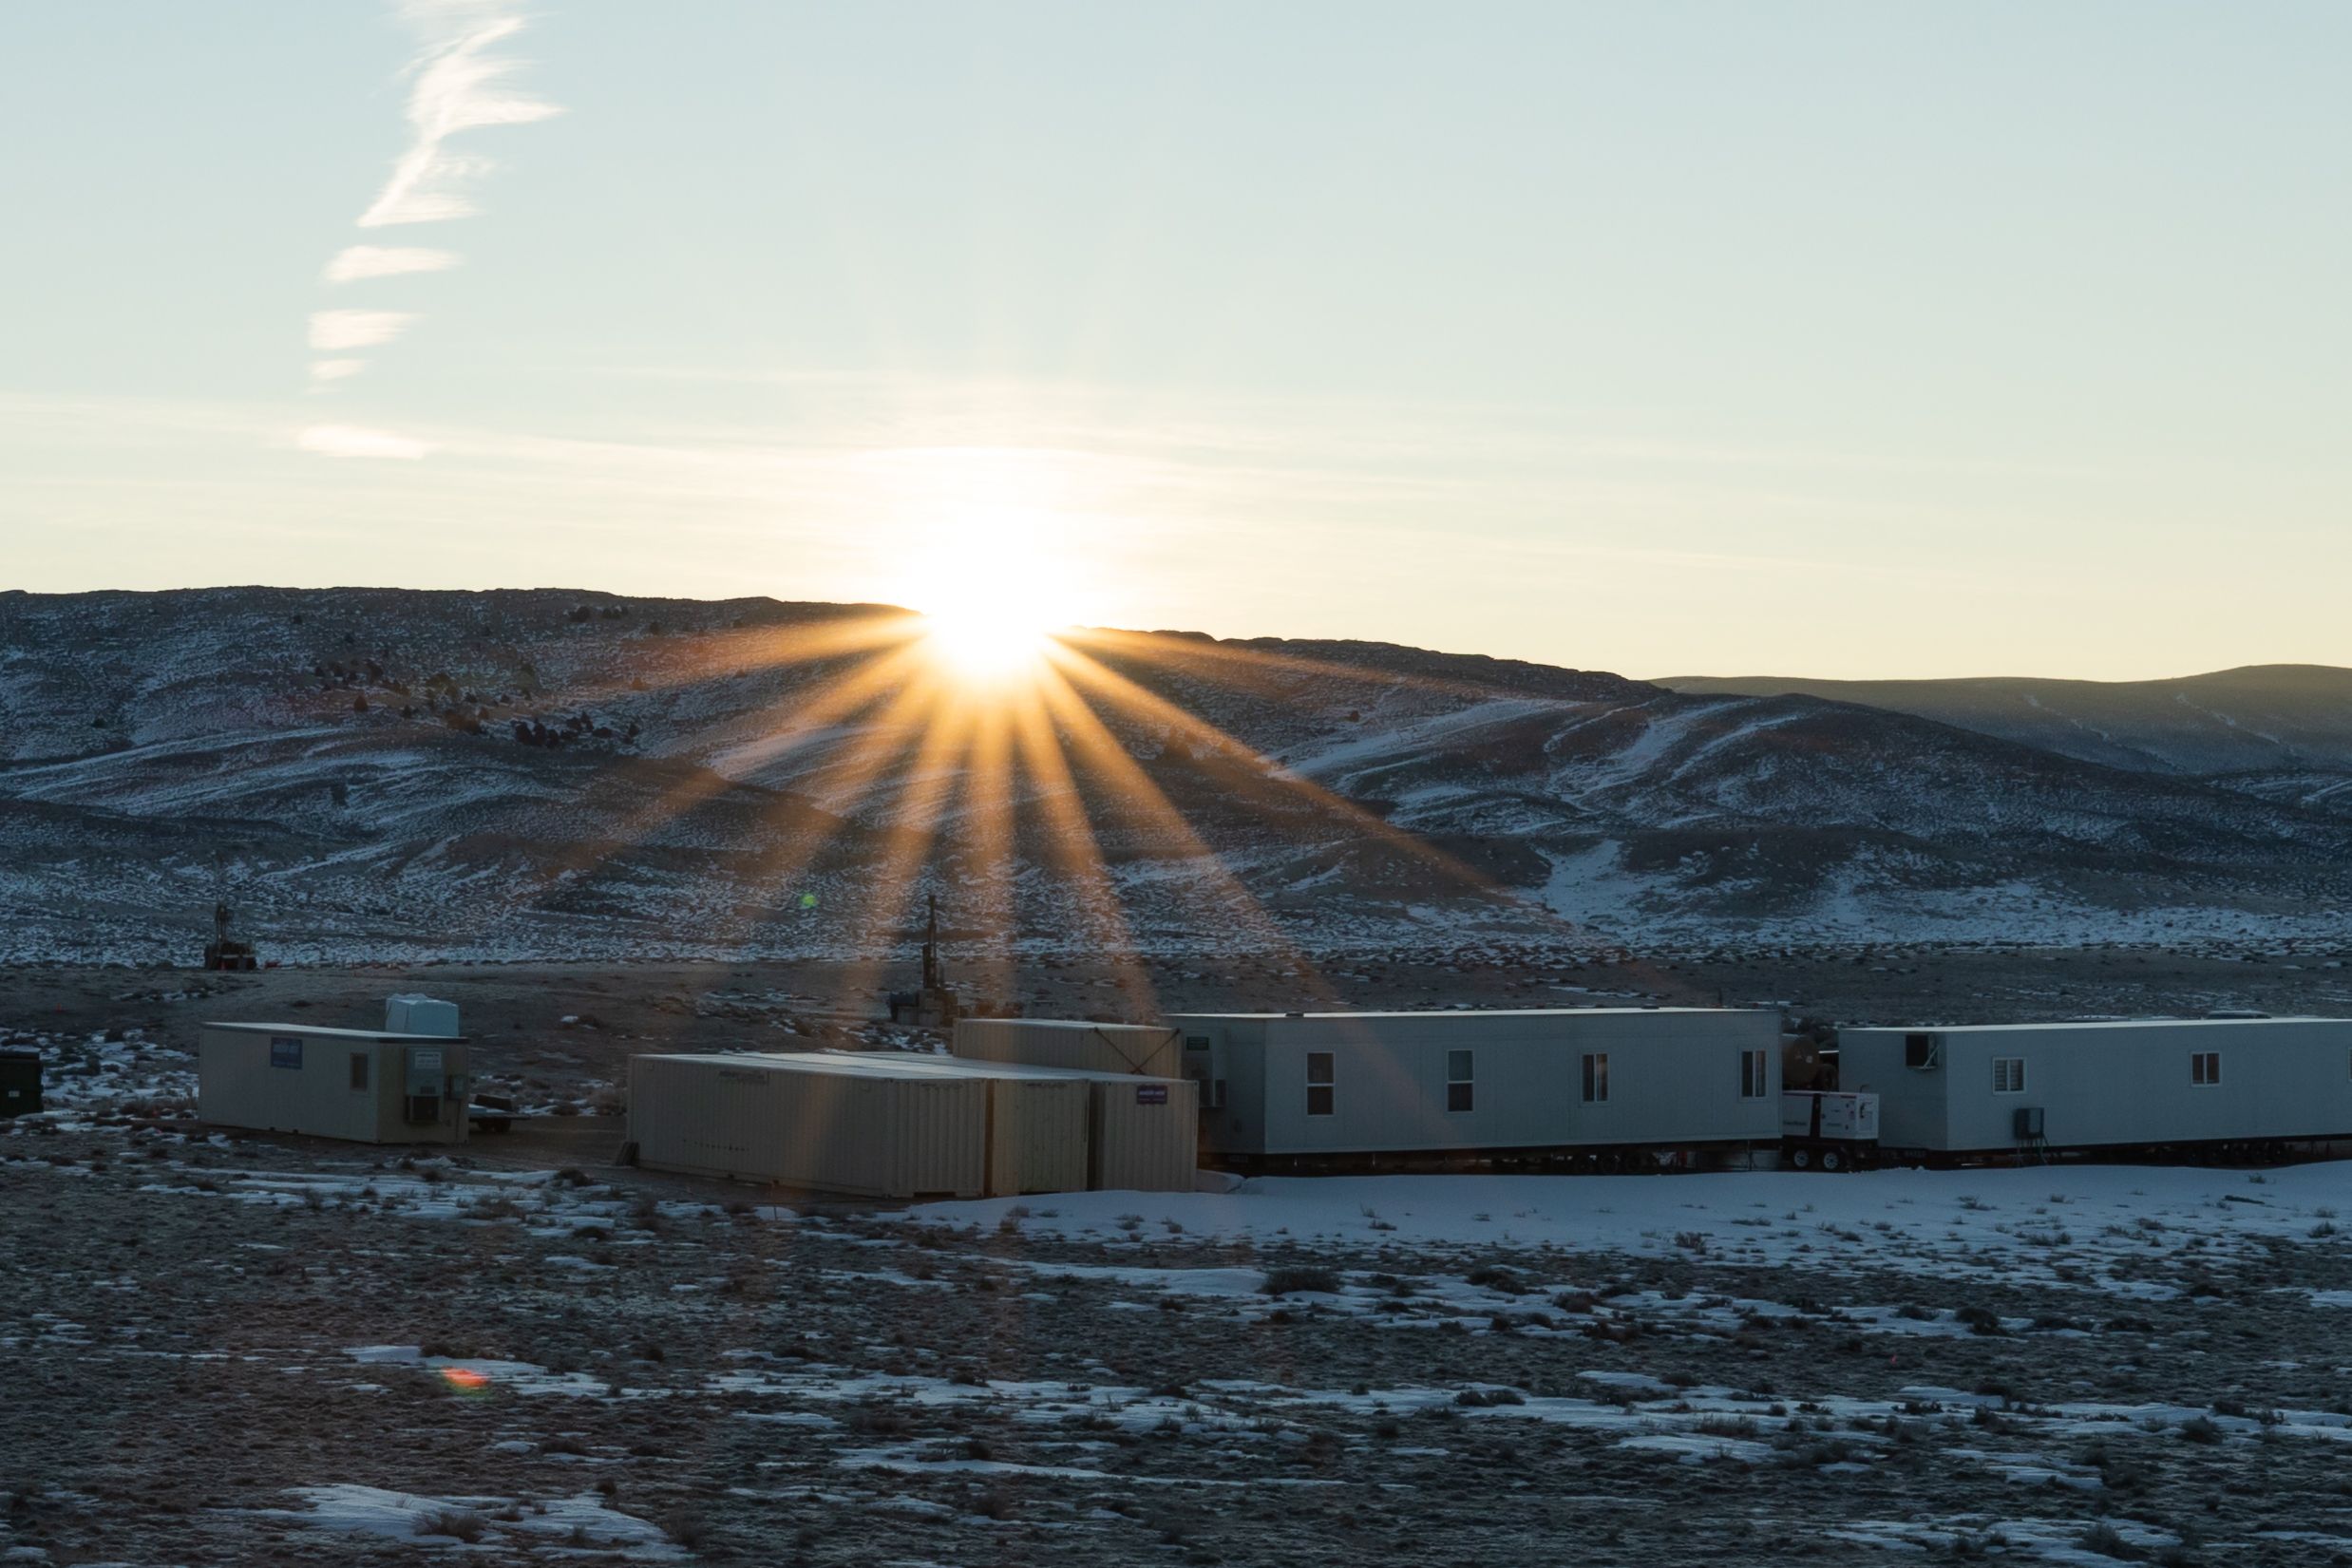 In tiny Wyoming town, Bill Gates bets big on nuclear power